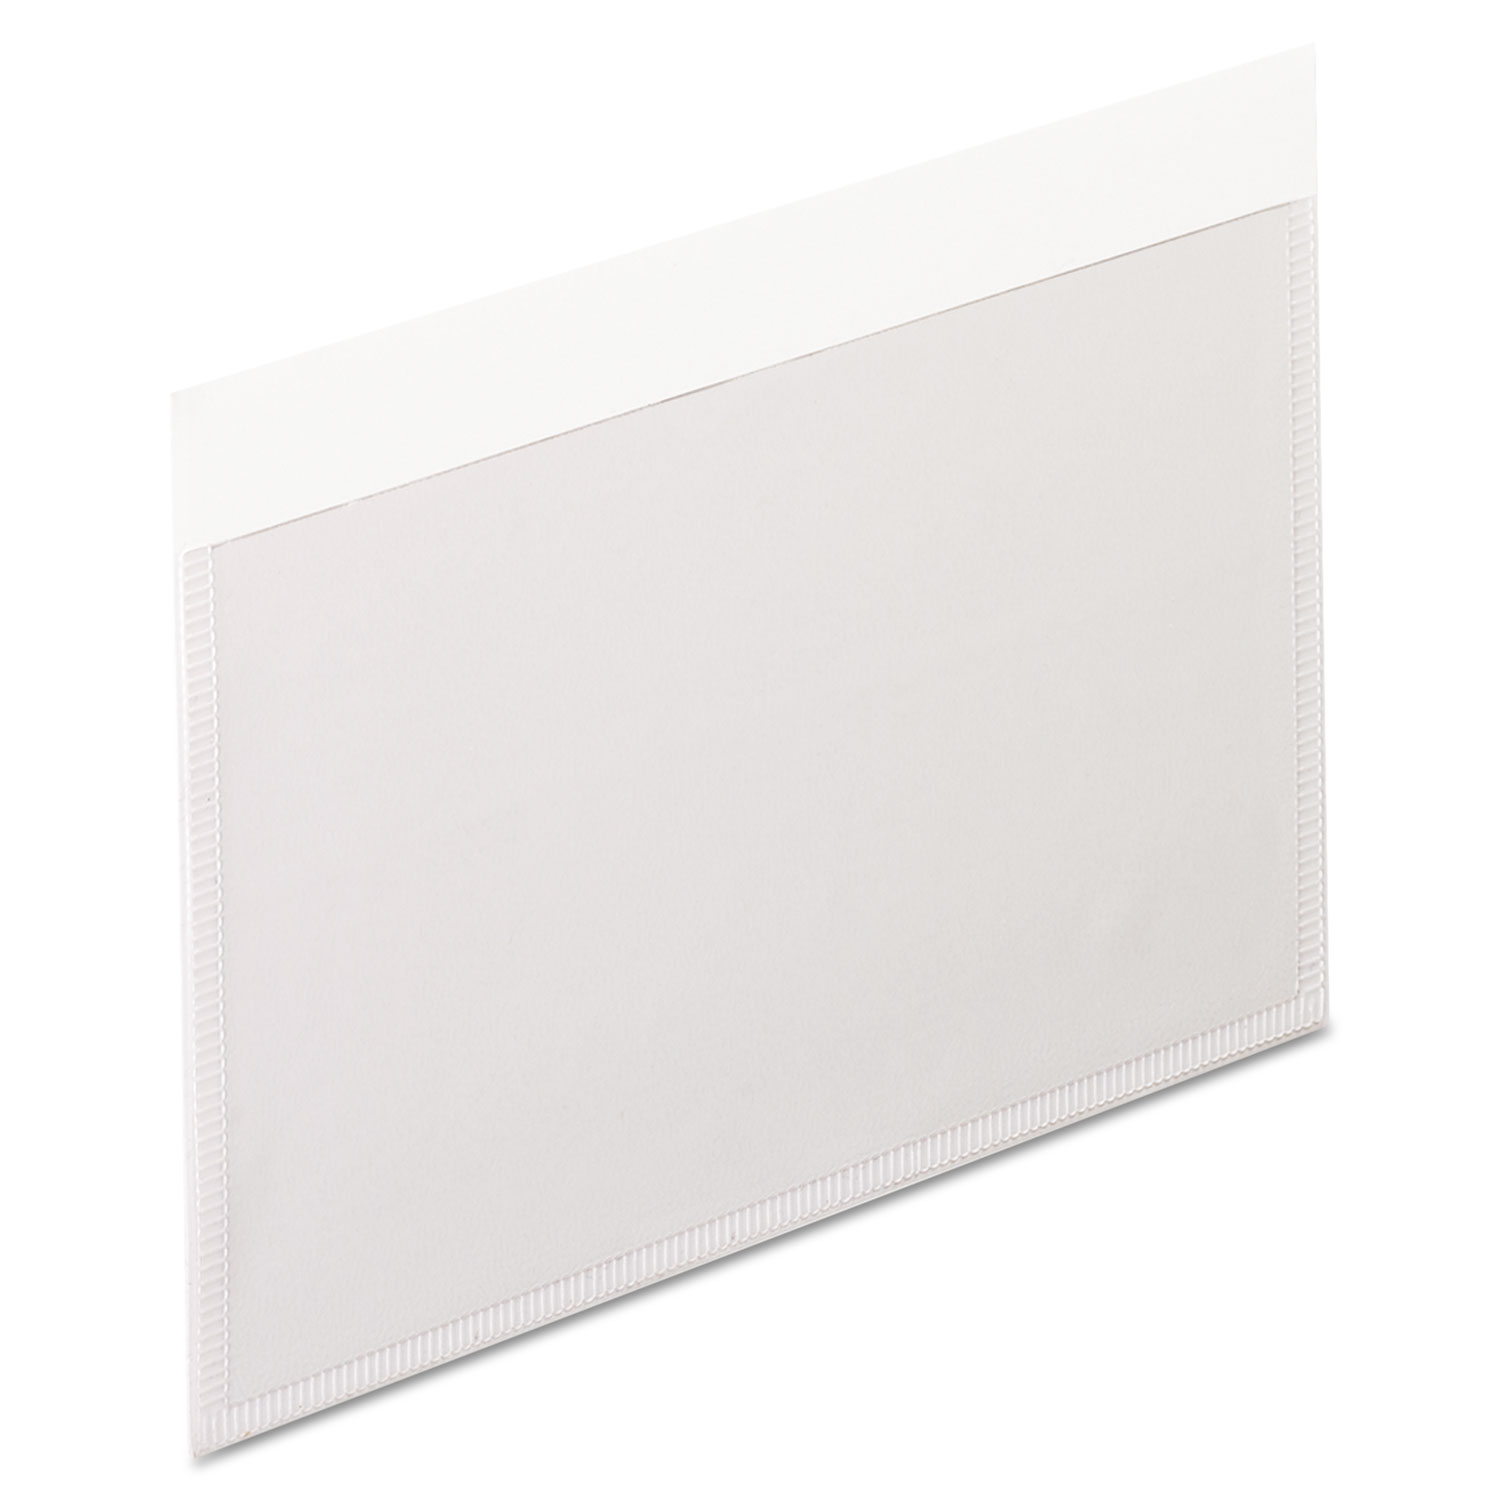  Pendaflex 99375 Self-Adhesive Pockets, 3 x 5, Clear Front/White Backing, 100/Box (PFX99375) 